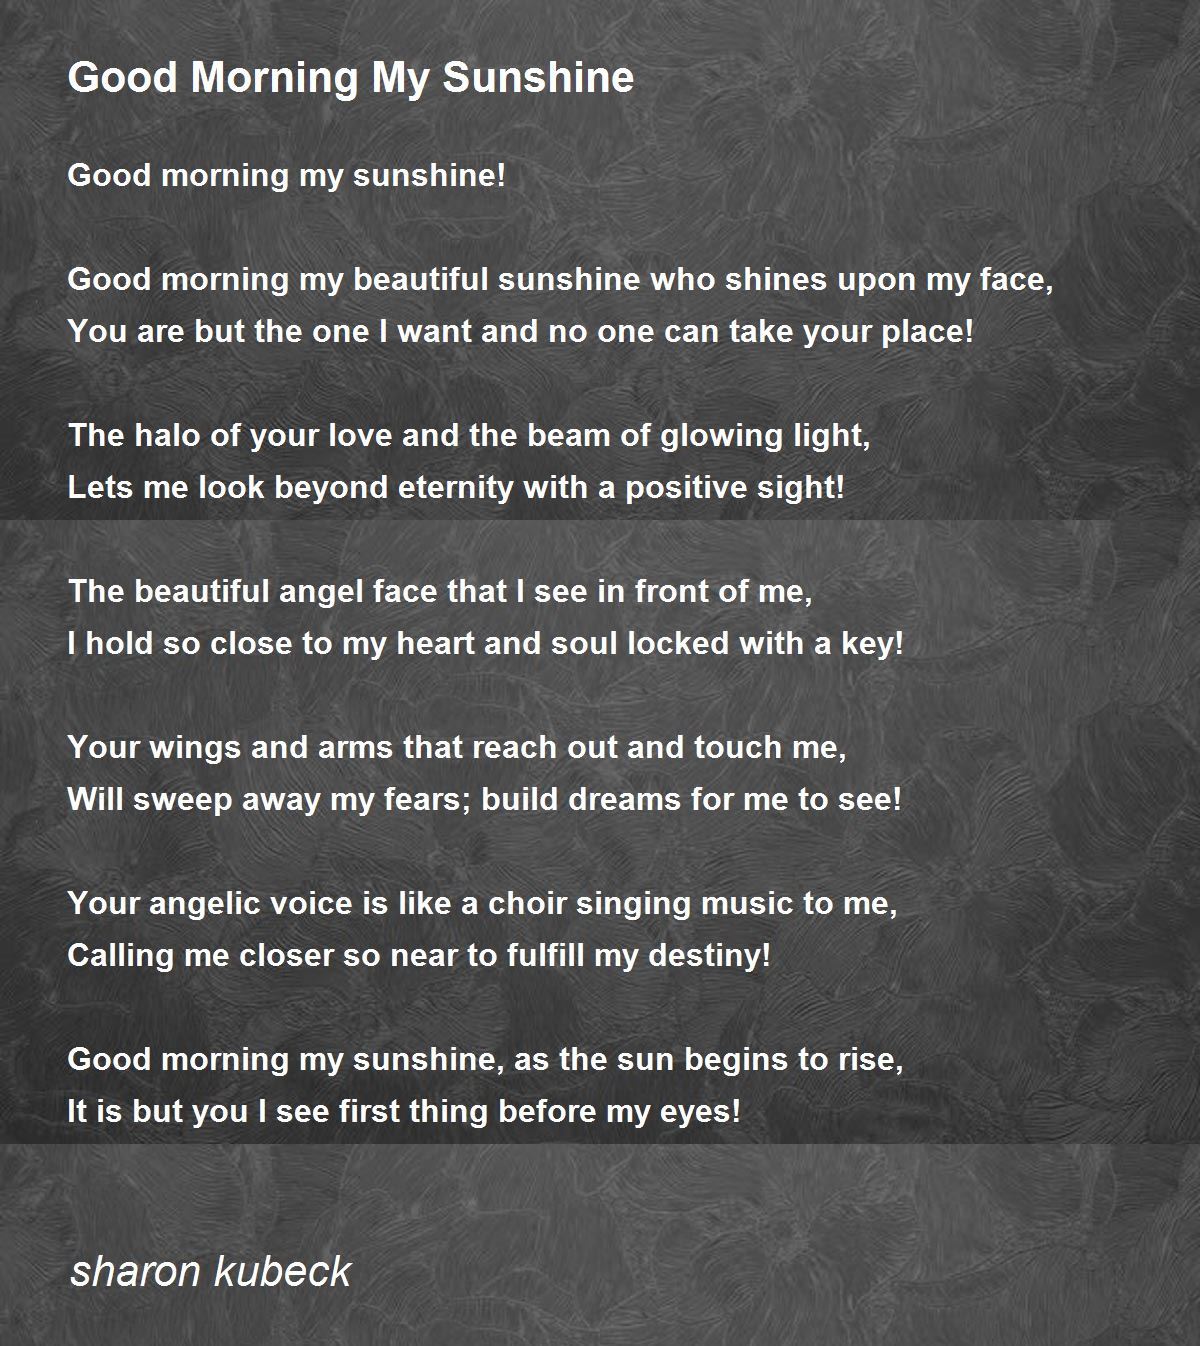 Good Morning My Sunshine - Good Morning My Sunshine Poem by sharon ...